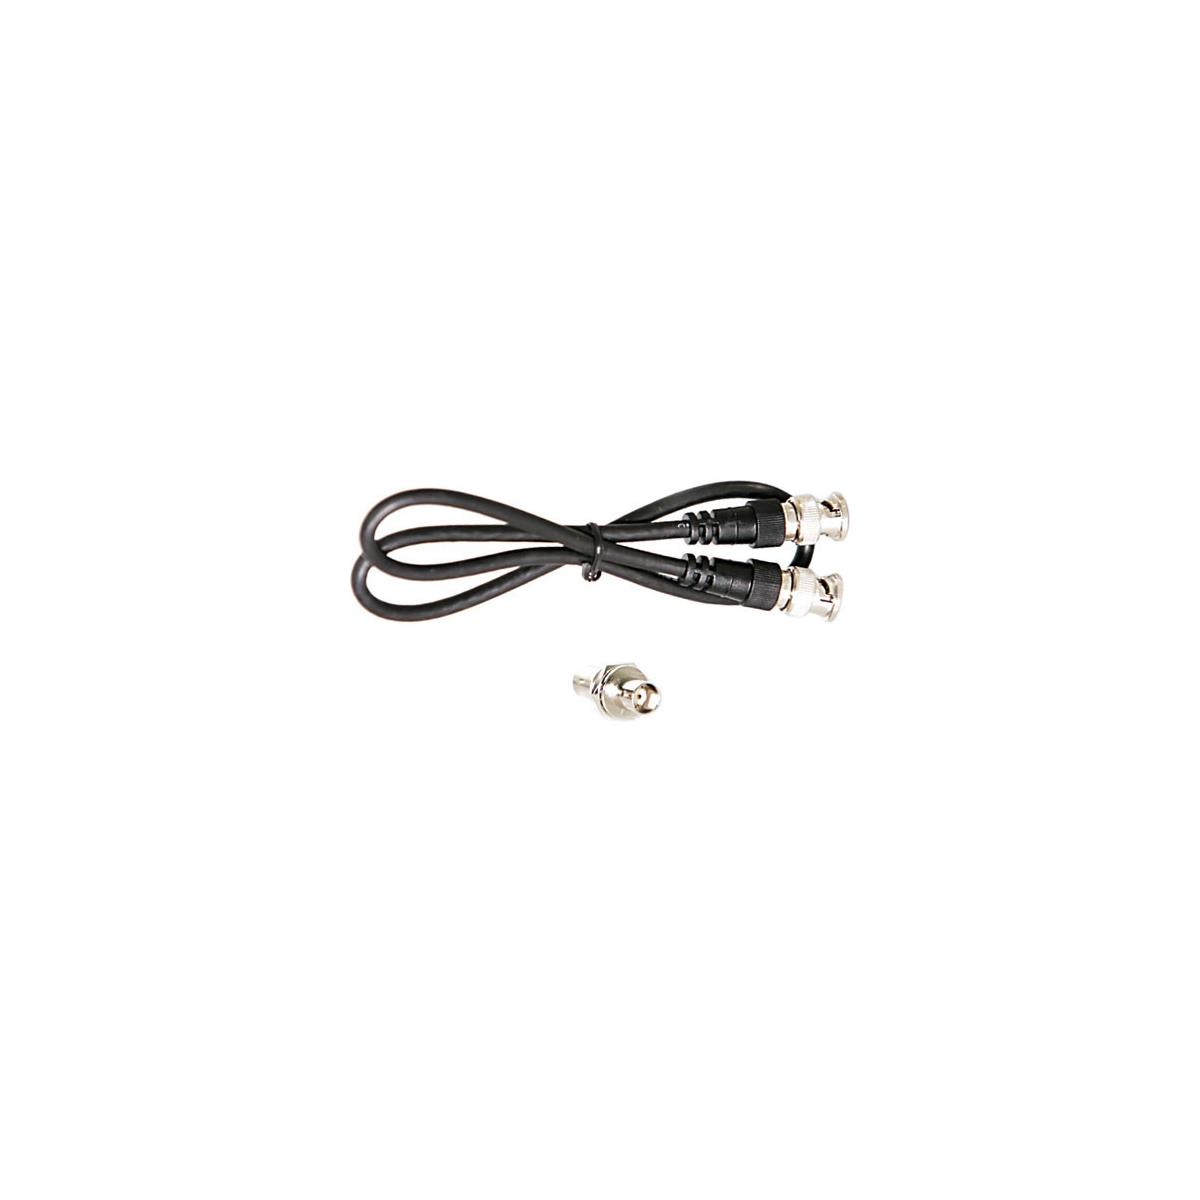 Image of Audix 25' Coaxial Cable with BNC Connector for RAD360 Wireless Receiver Antenna